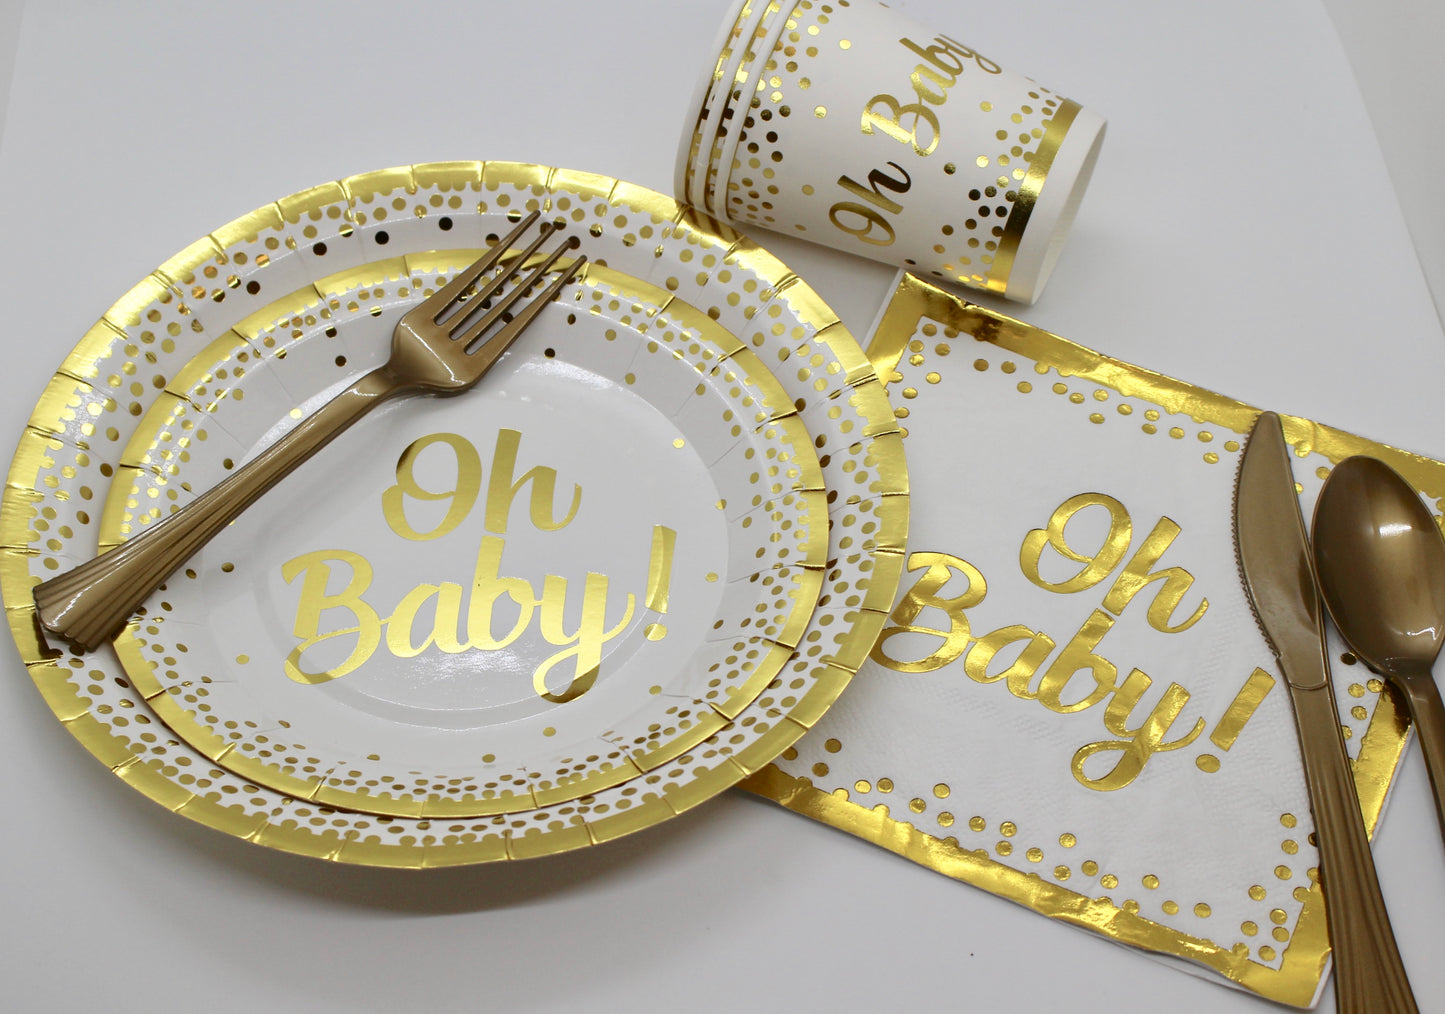 Oh Baby! Paper Paper Plate Set